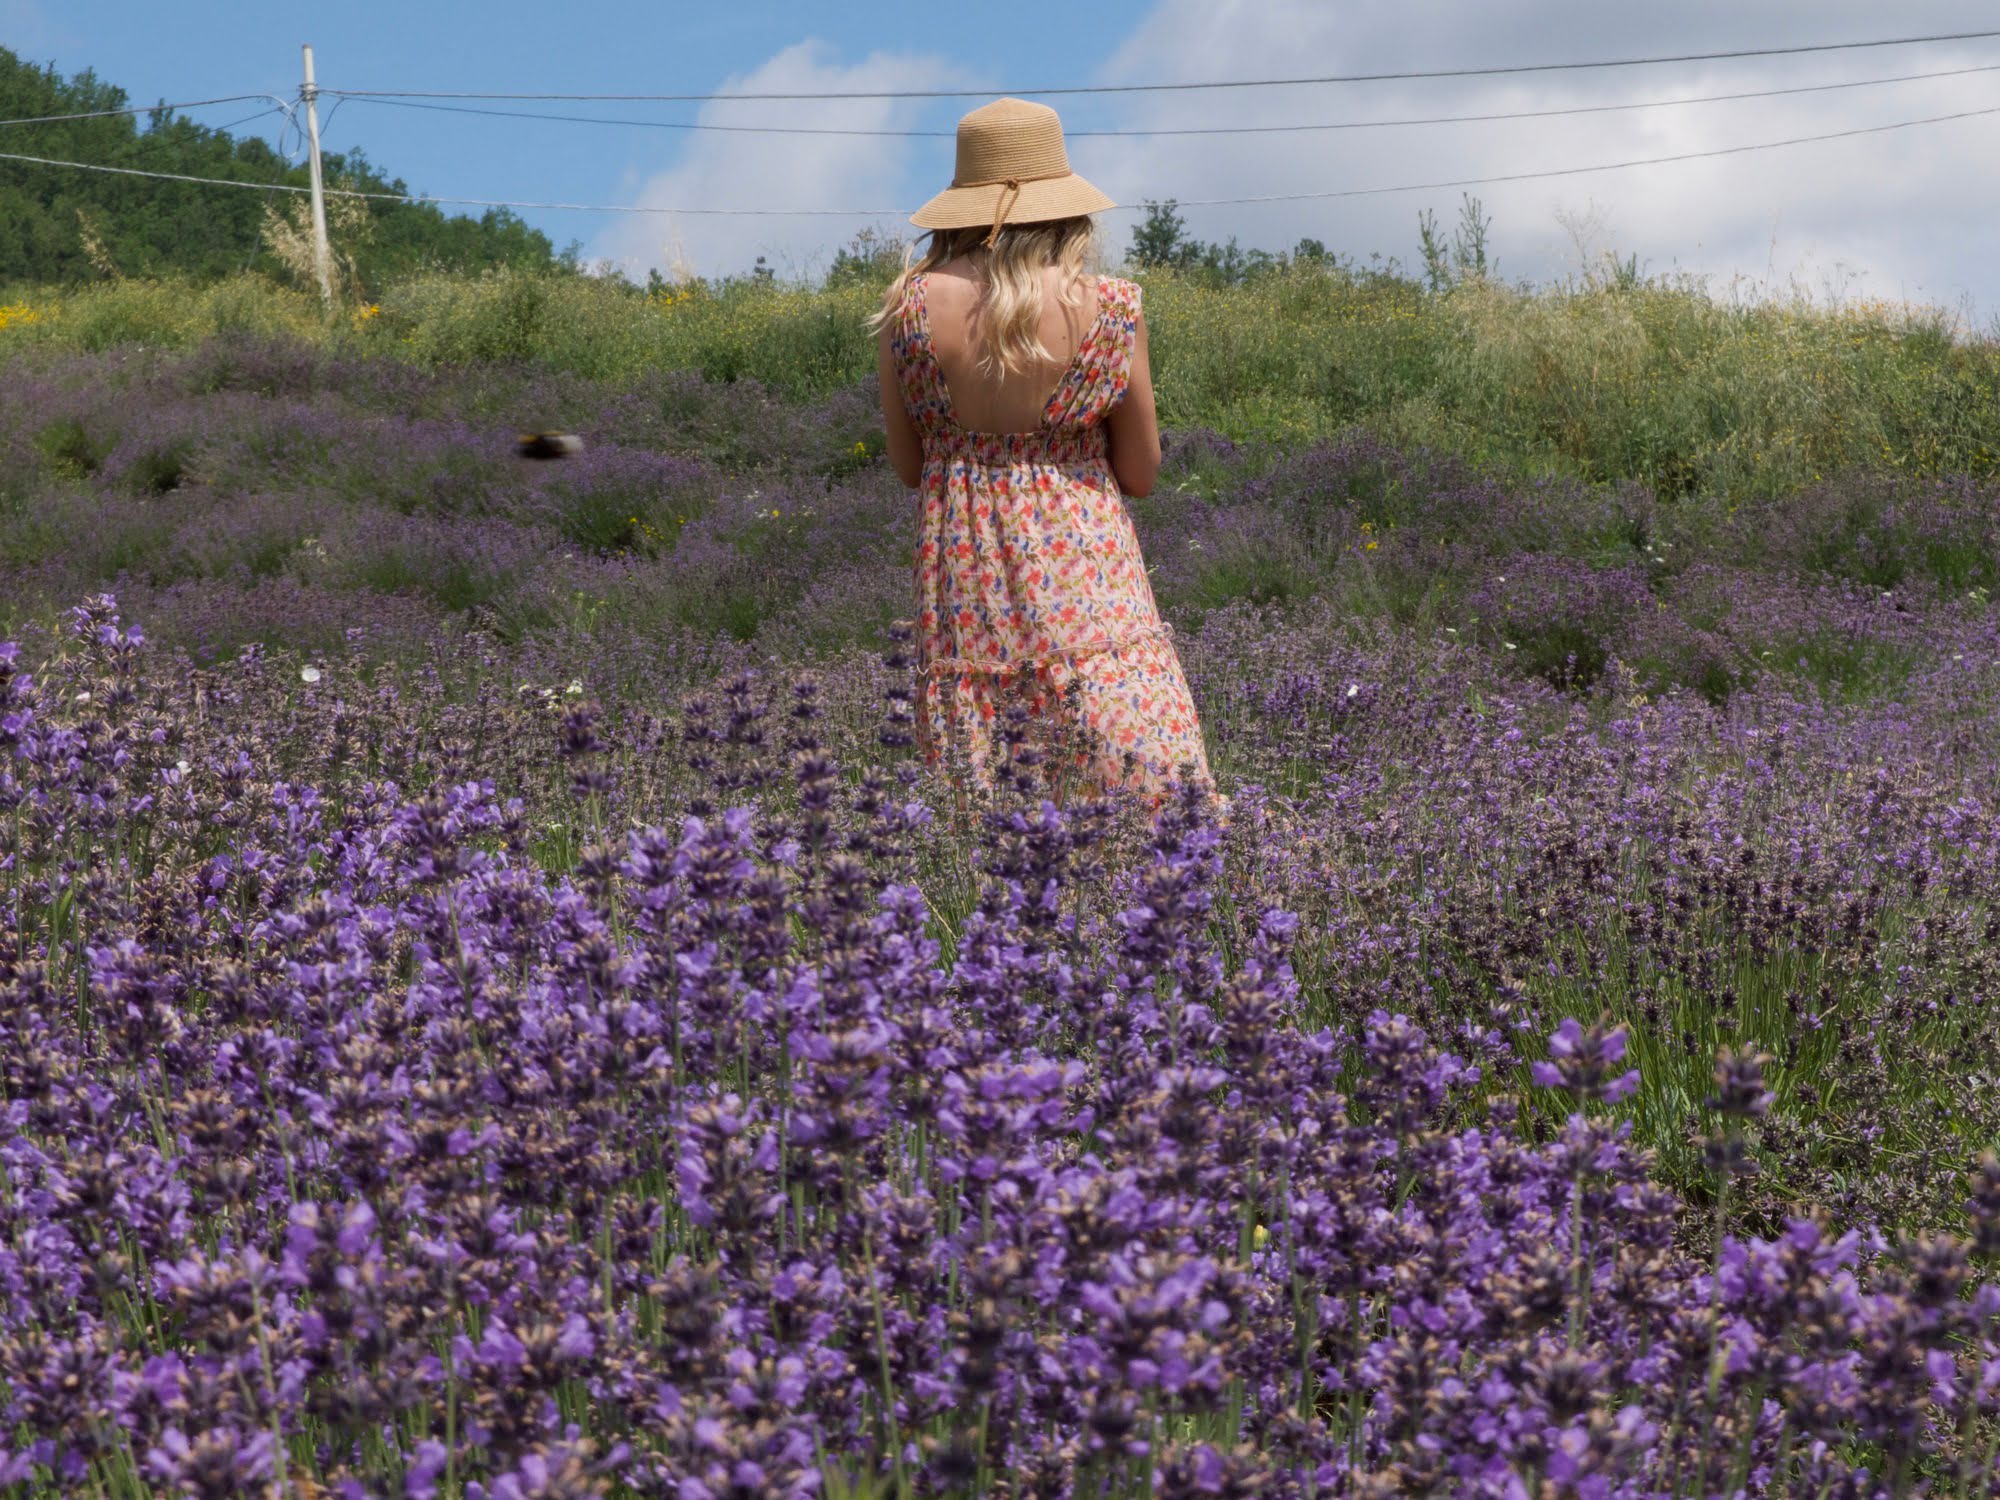 Lavender harvest and distillation essential oils (with local products tasting)